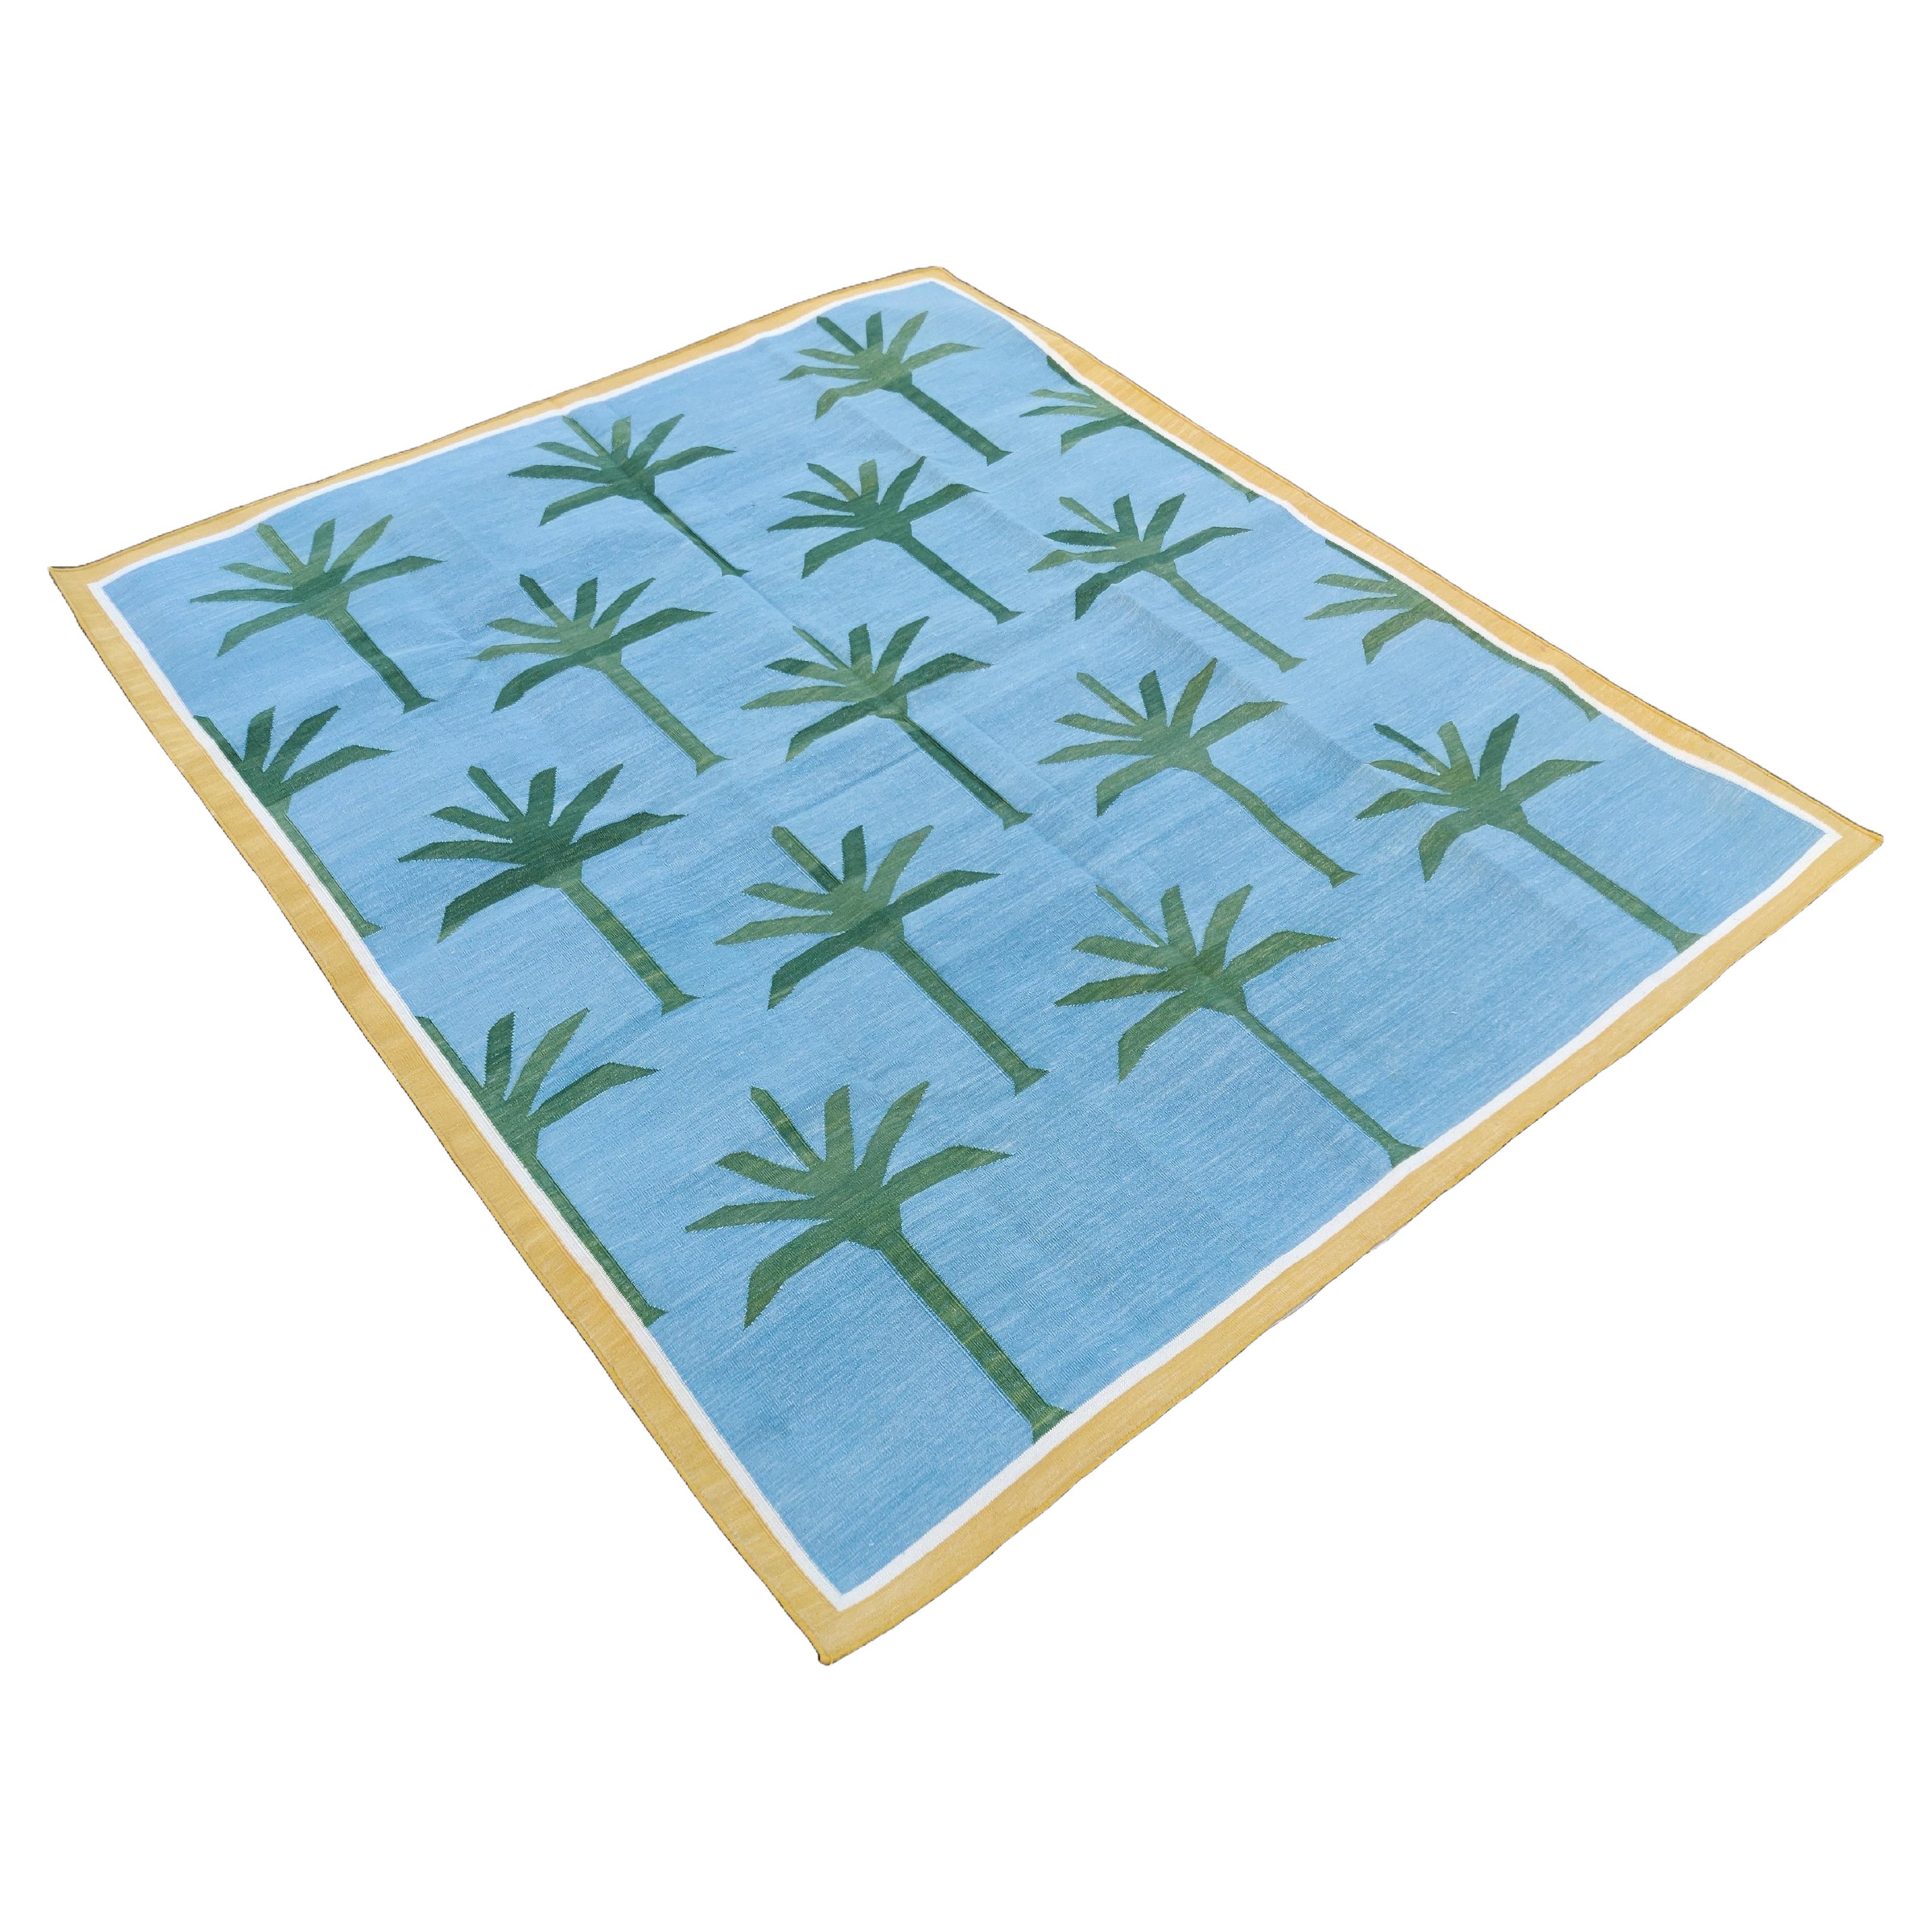 Handmade Cotton Area Flat Weave Rug, 5x7 Blue And Green Palm Tree Indian Dhurrie